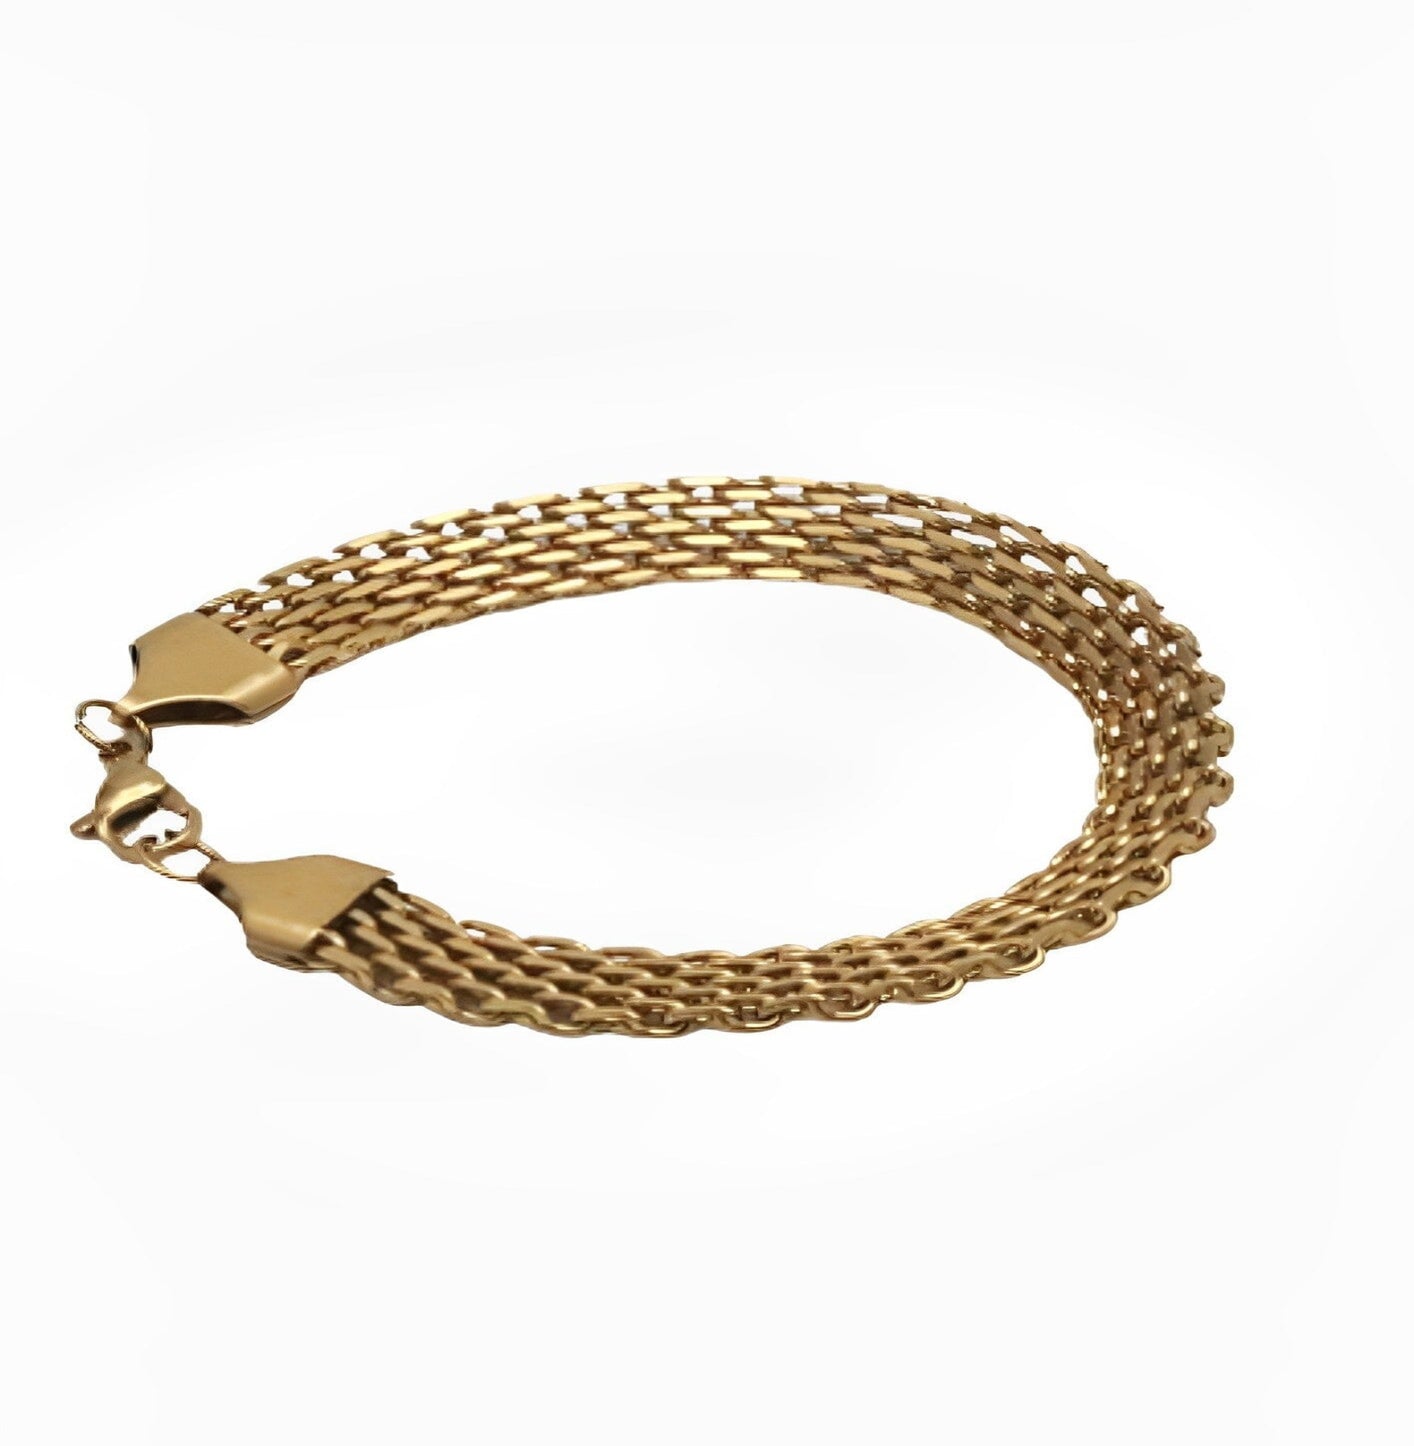 VACUUM BRACELET braclet Yubama Jewelry Online Store - The Elegant Designs of Gold and Silver ! 